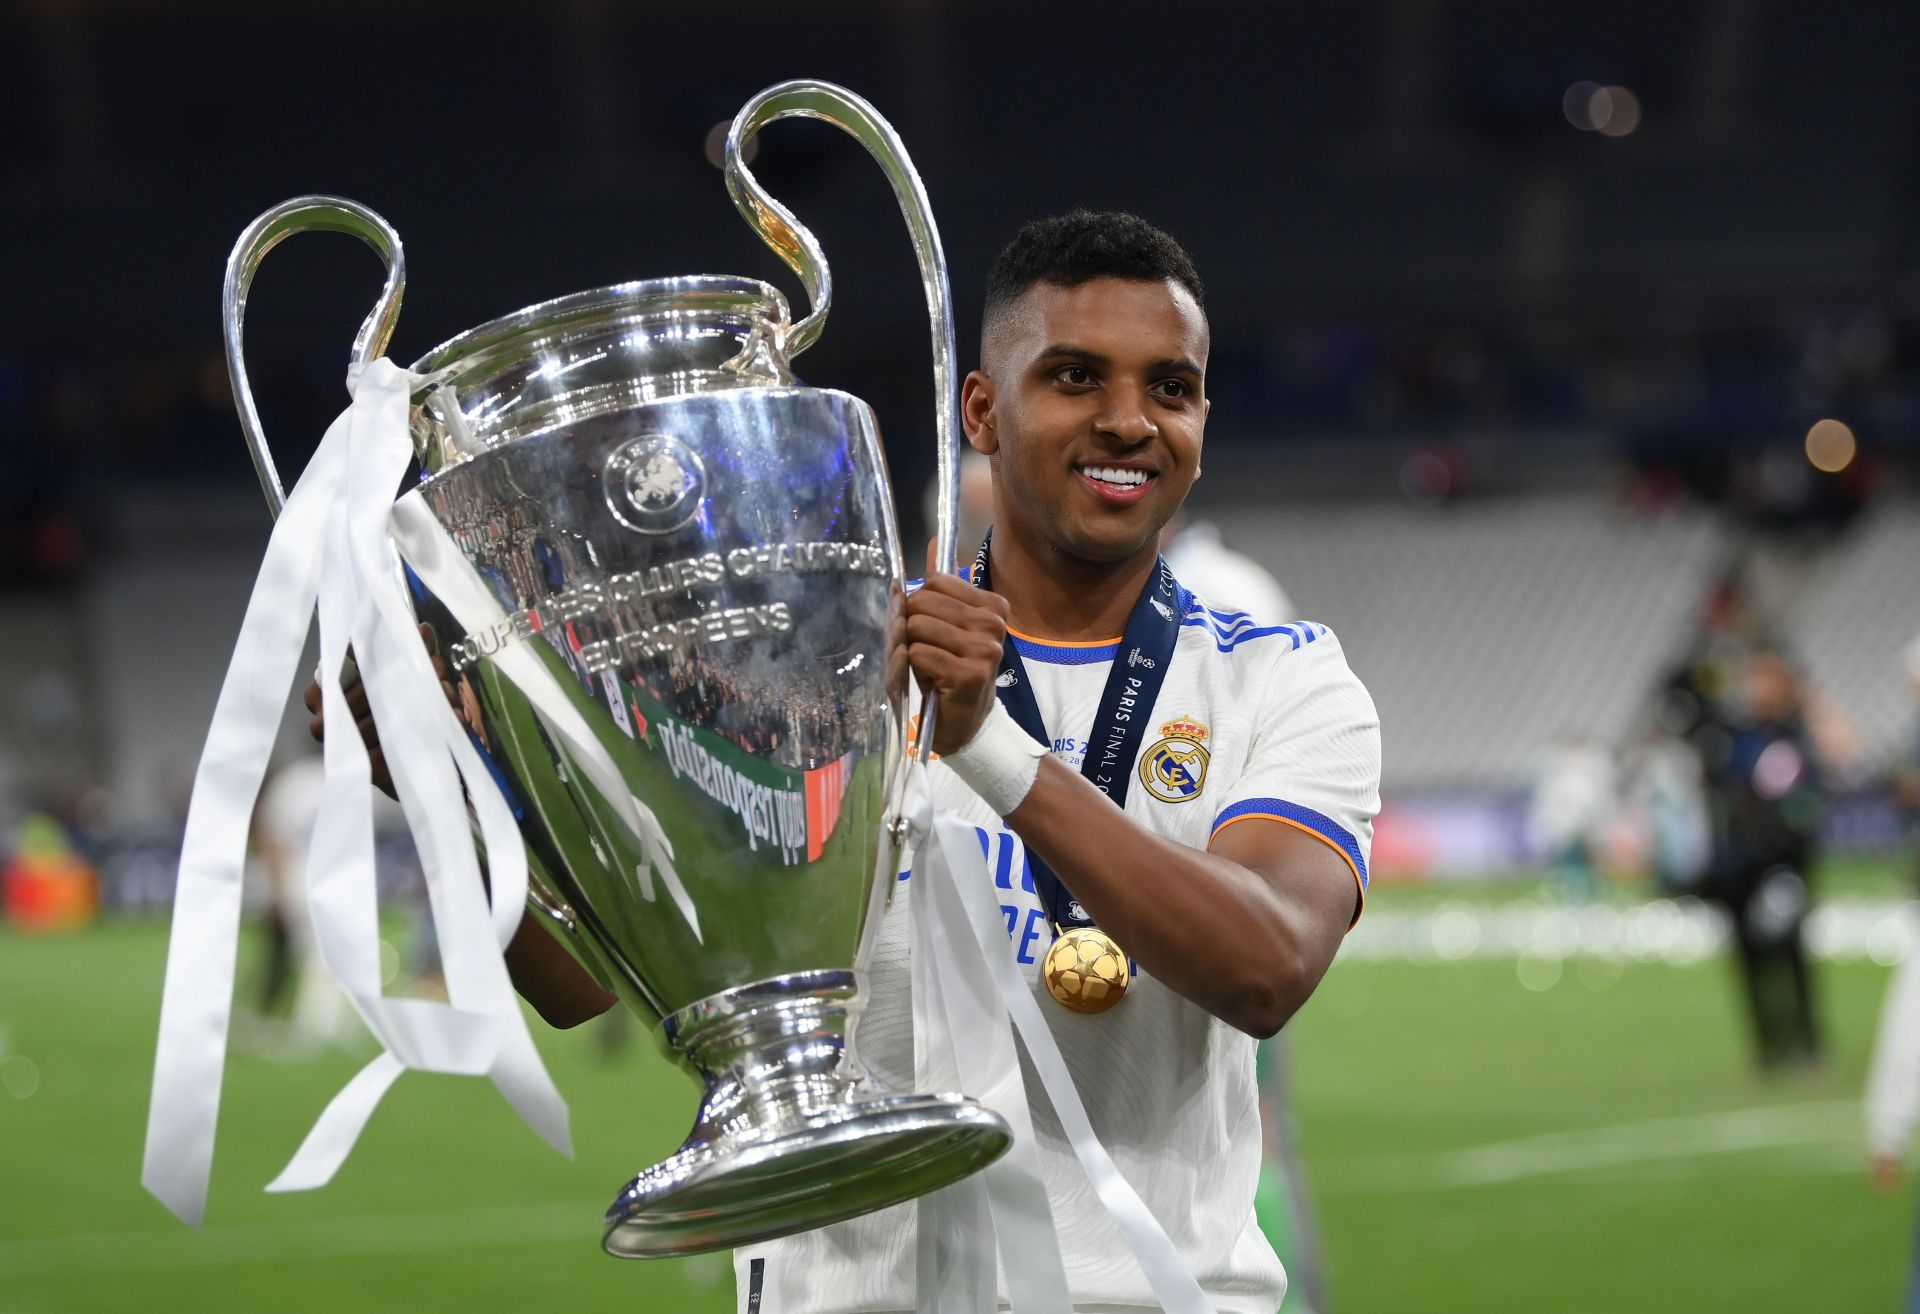 Rodrygo Goes wants to continue his good form at the Santiago Bernabeu.